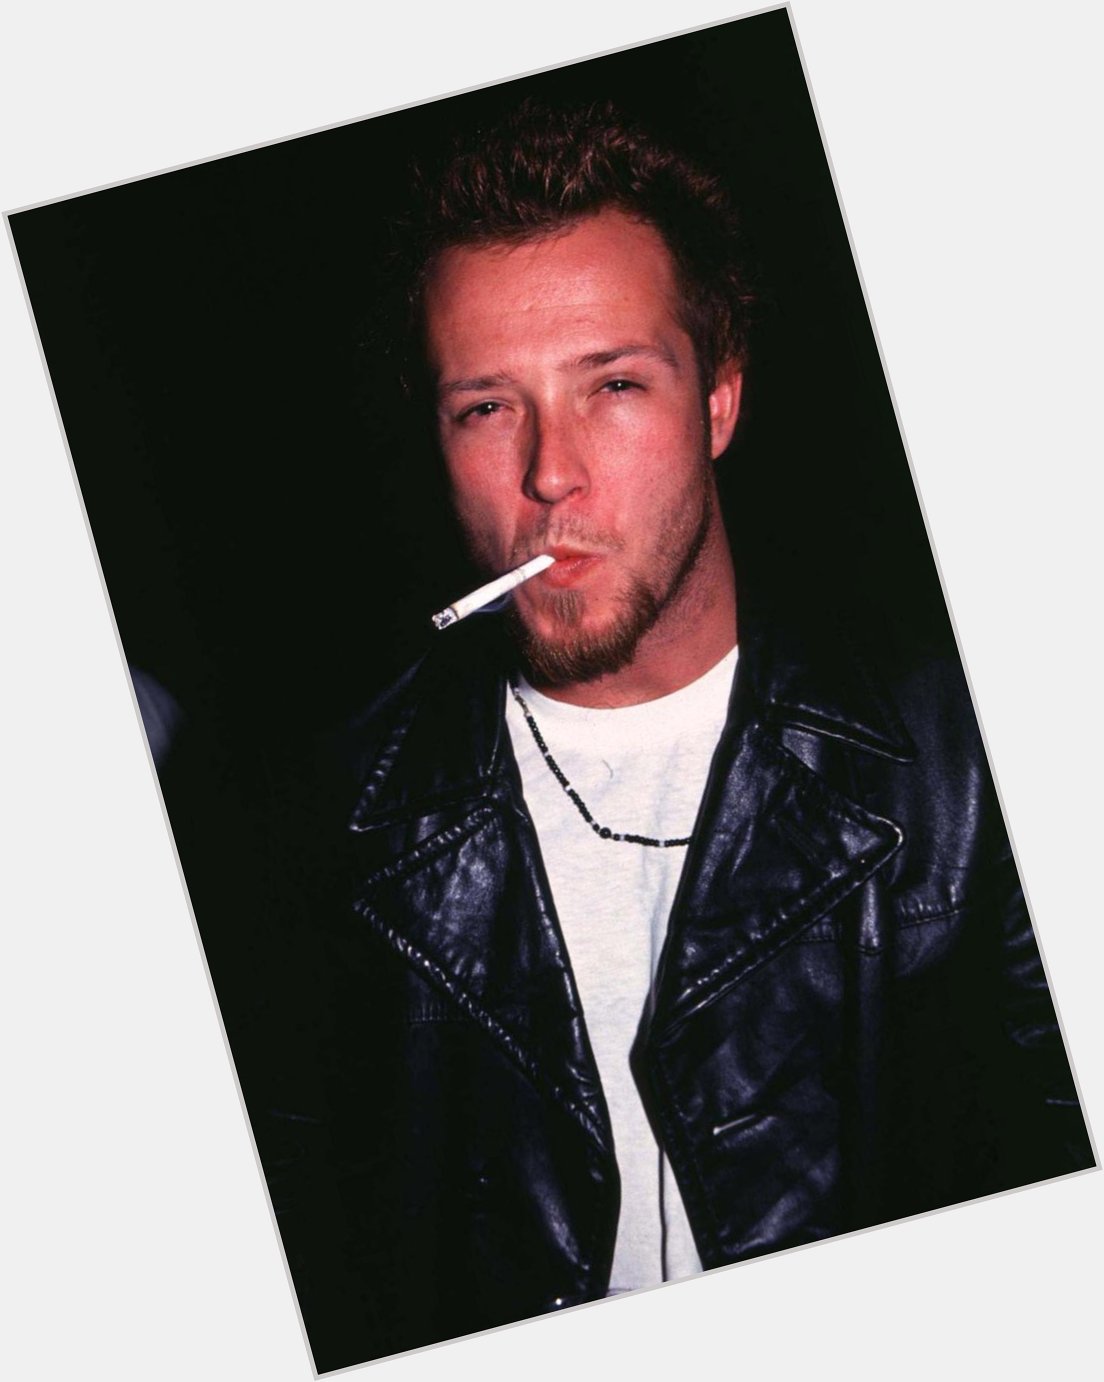 Happy birthday to lead singer, Scott Weiland! He would have been 50 today. 